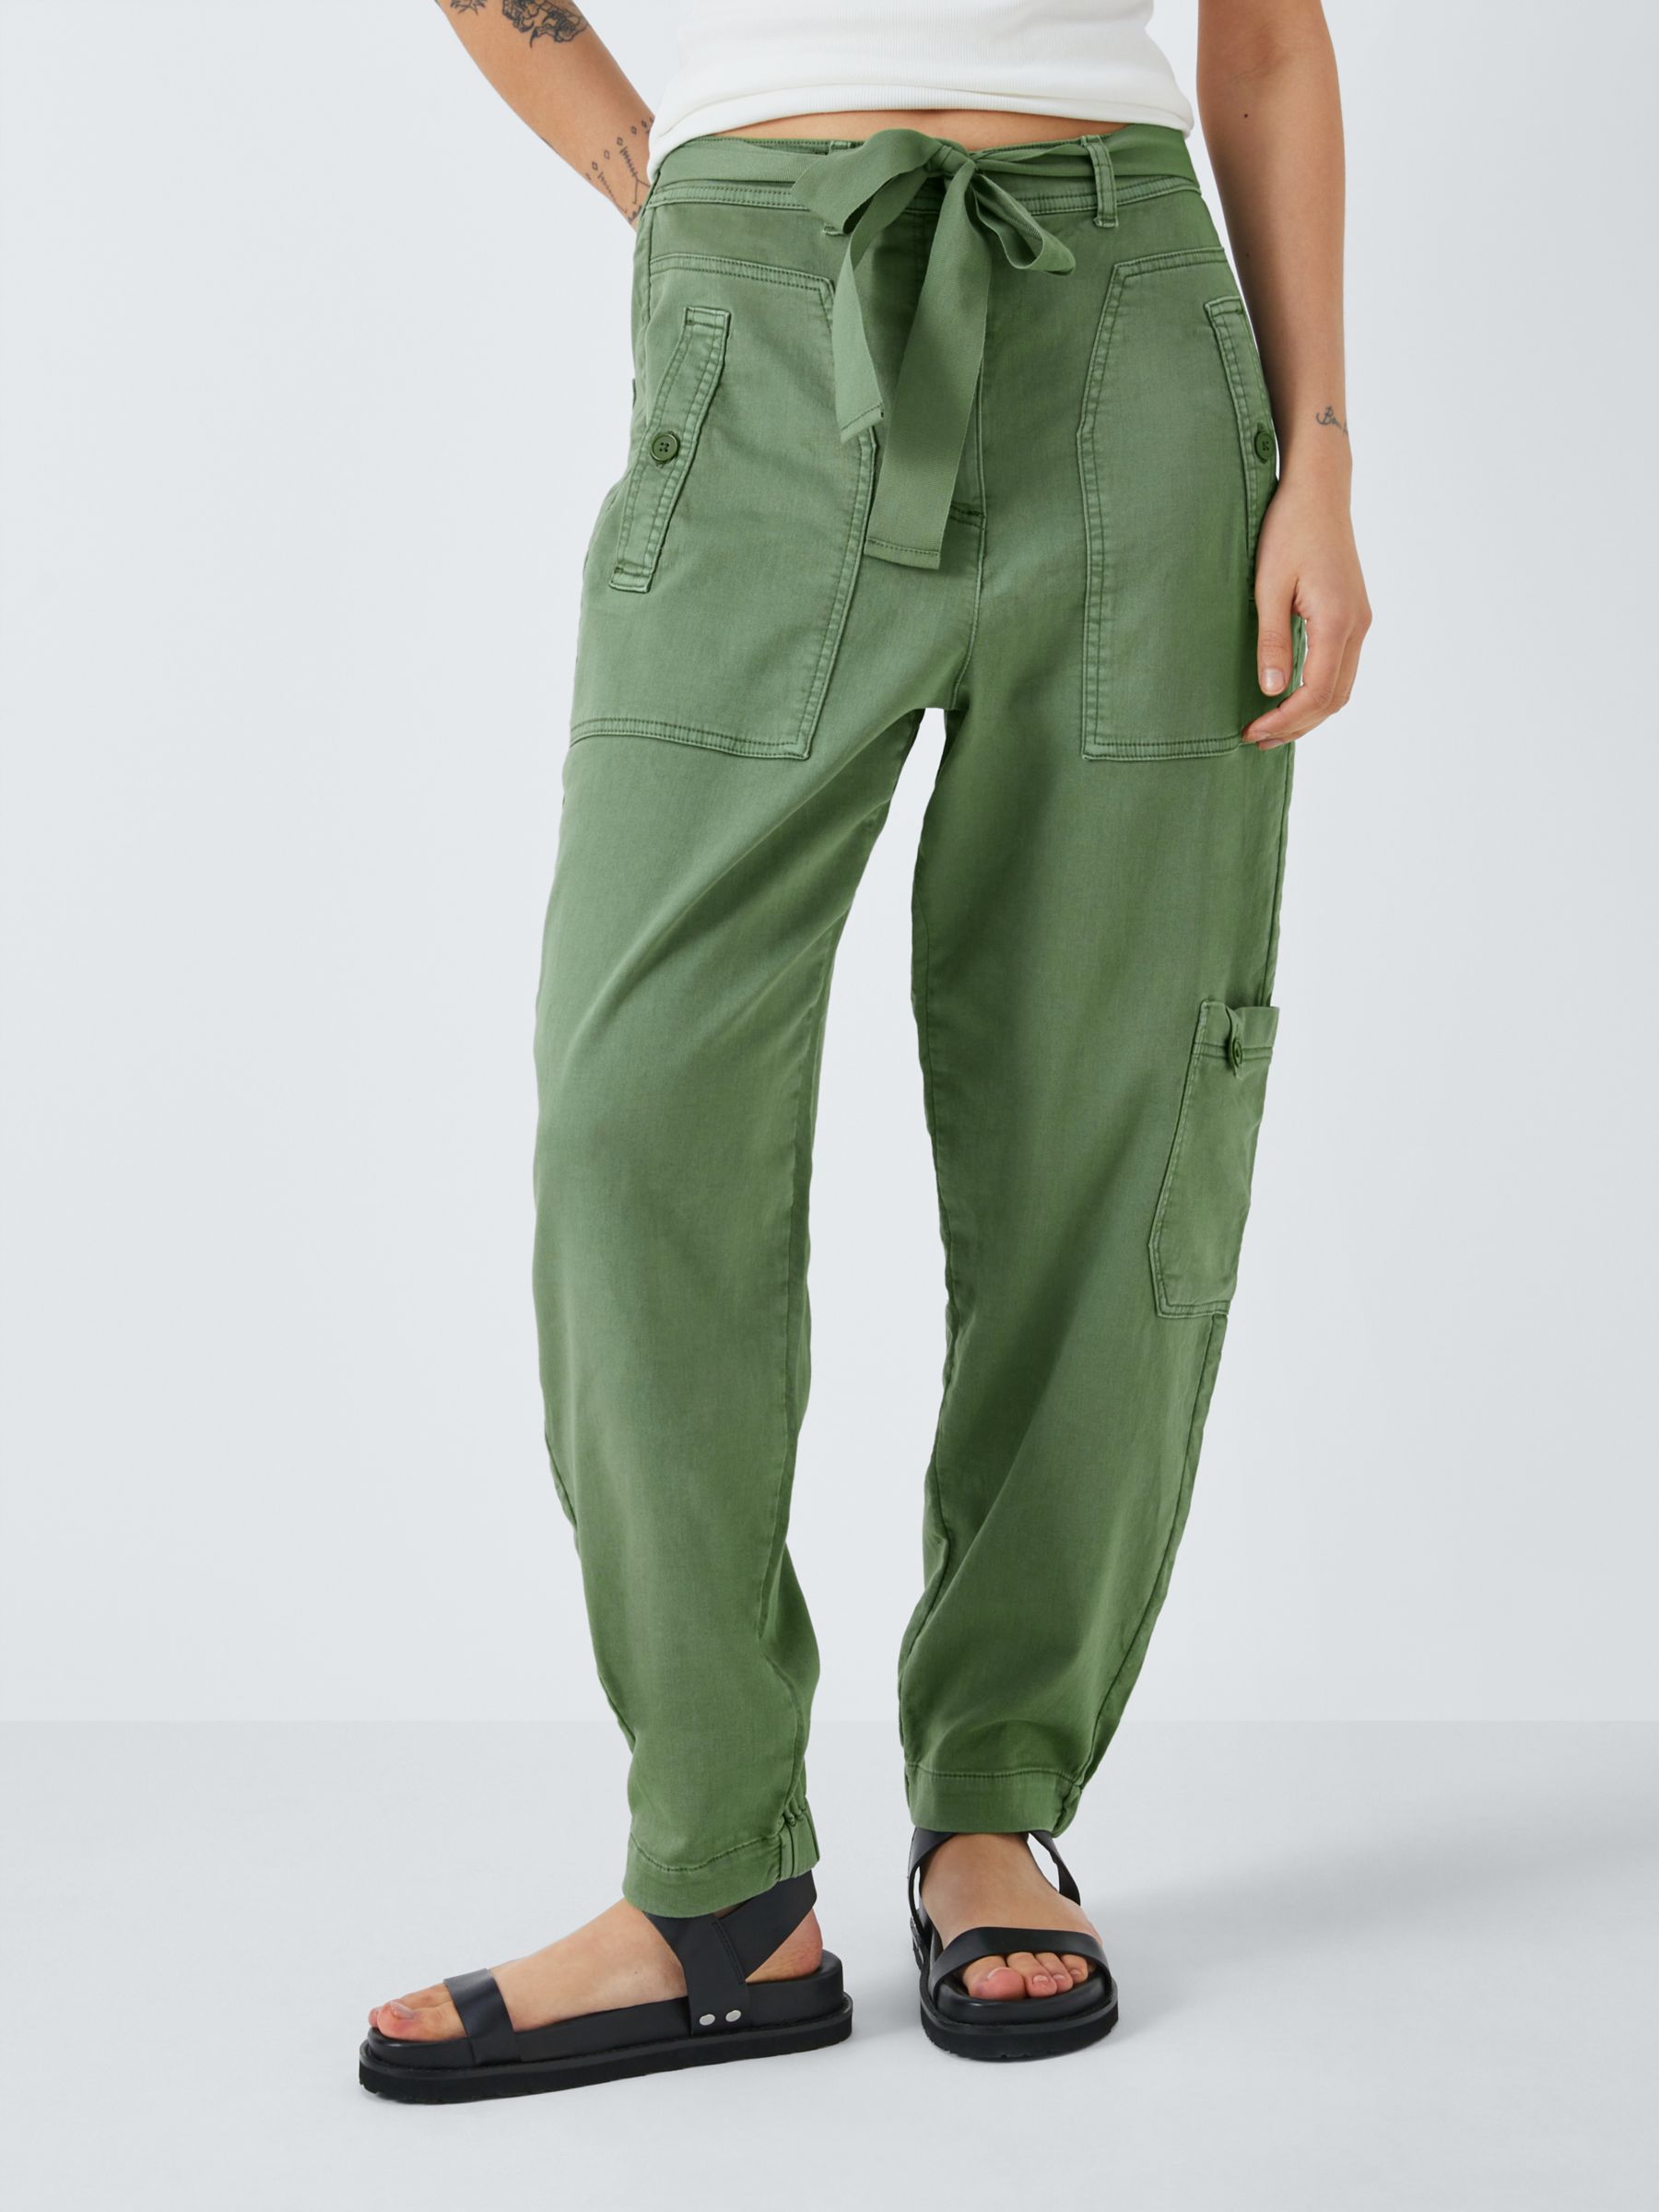 AND/OR Caitlin Cargo Trousers, Khaki, 6